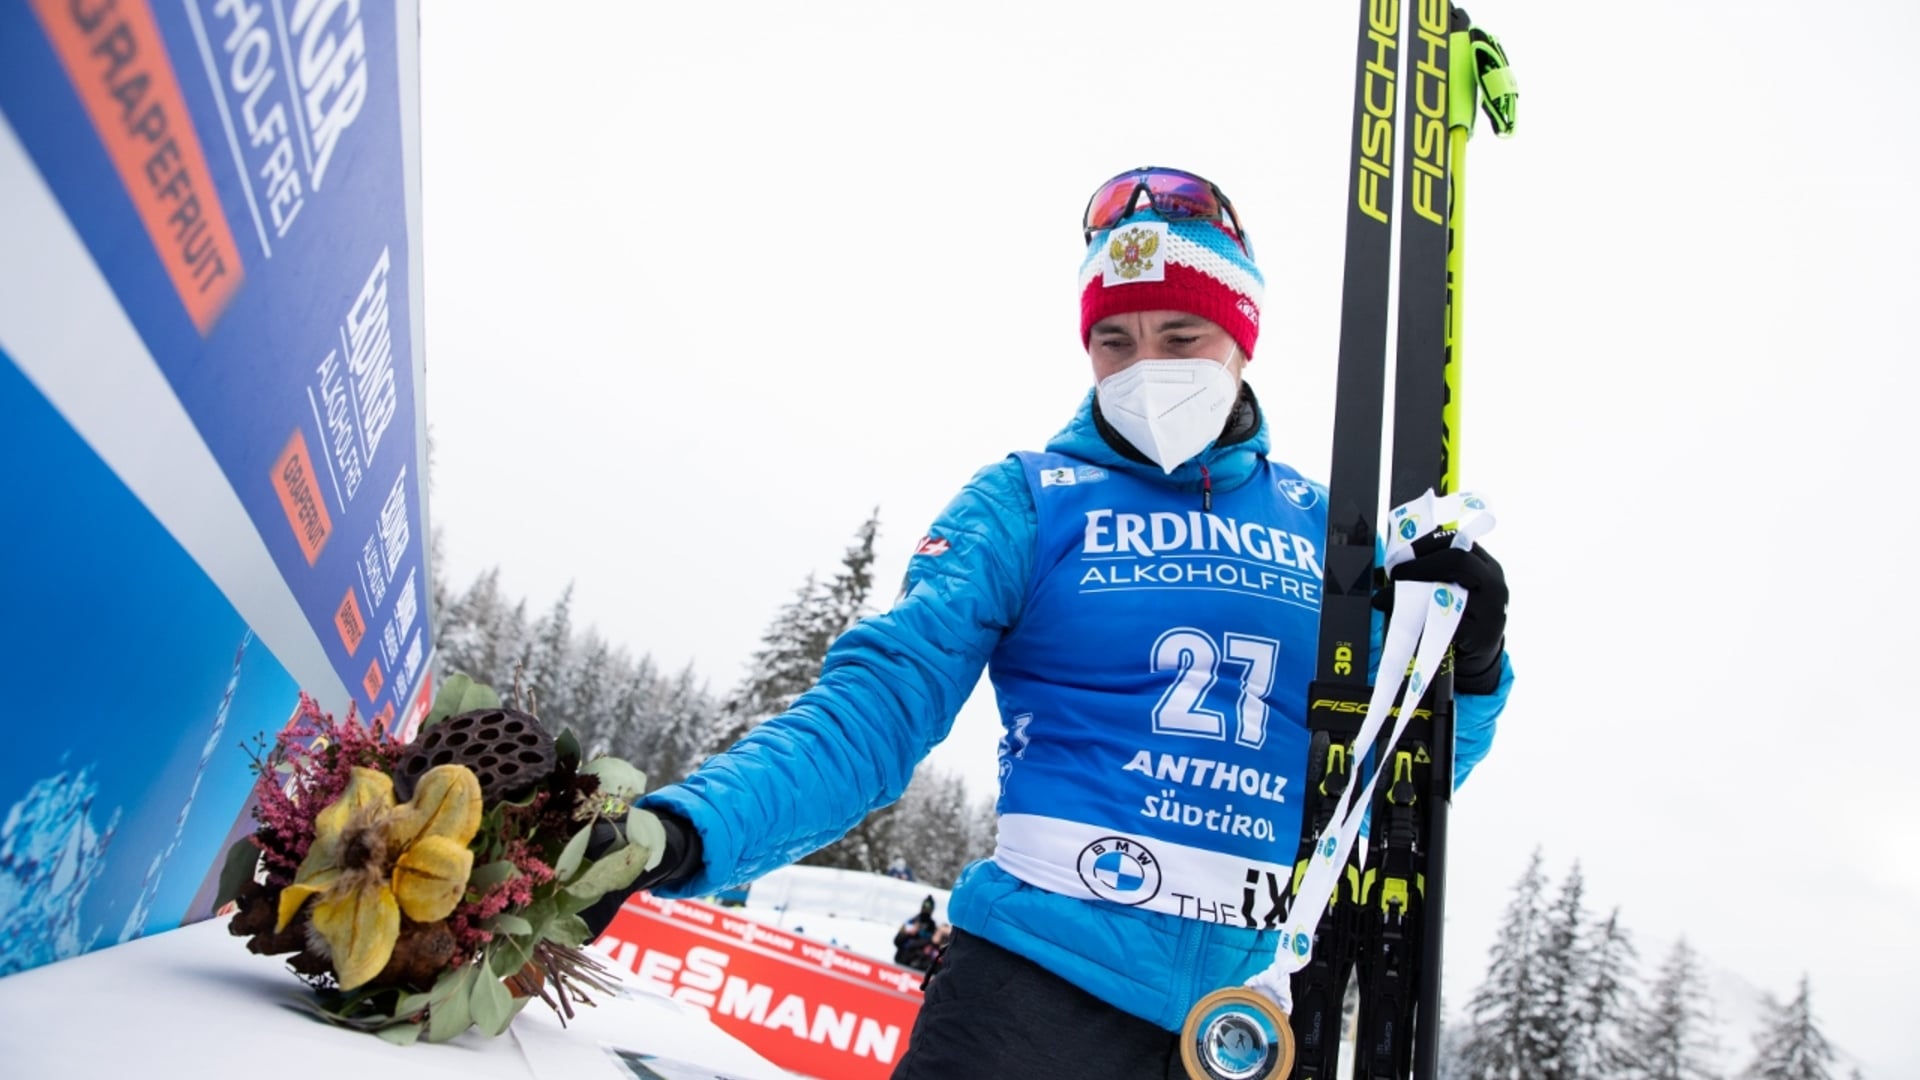 22.01.2021 - Two Competitions in Antholz on Saturday